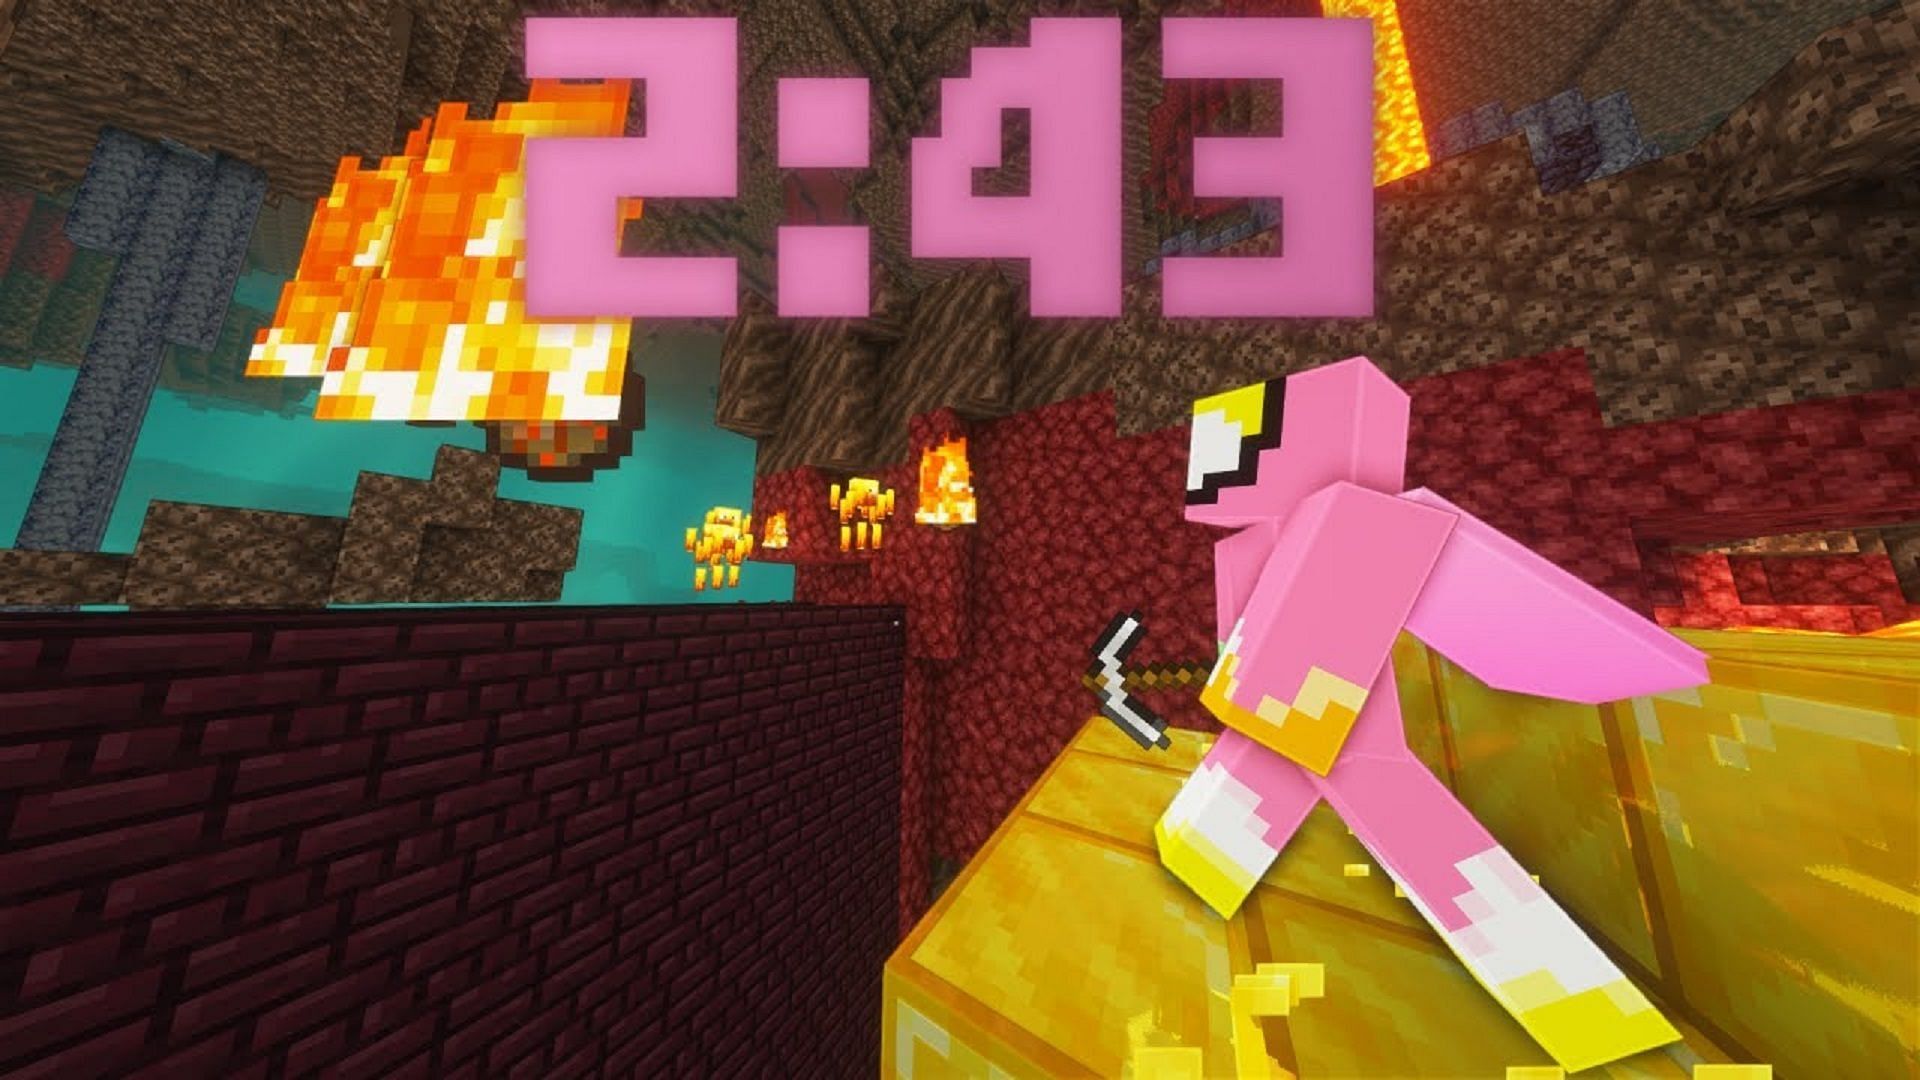 What is the Minecraft speedrun world record as of 2022?